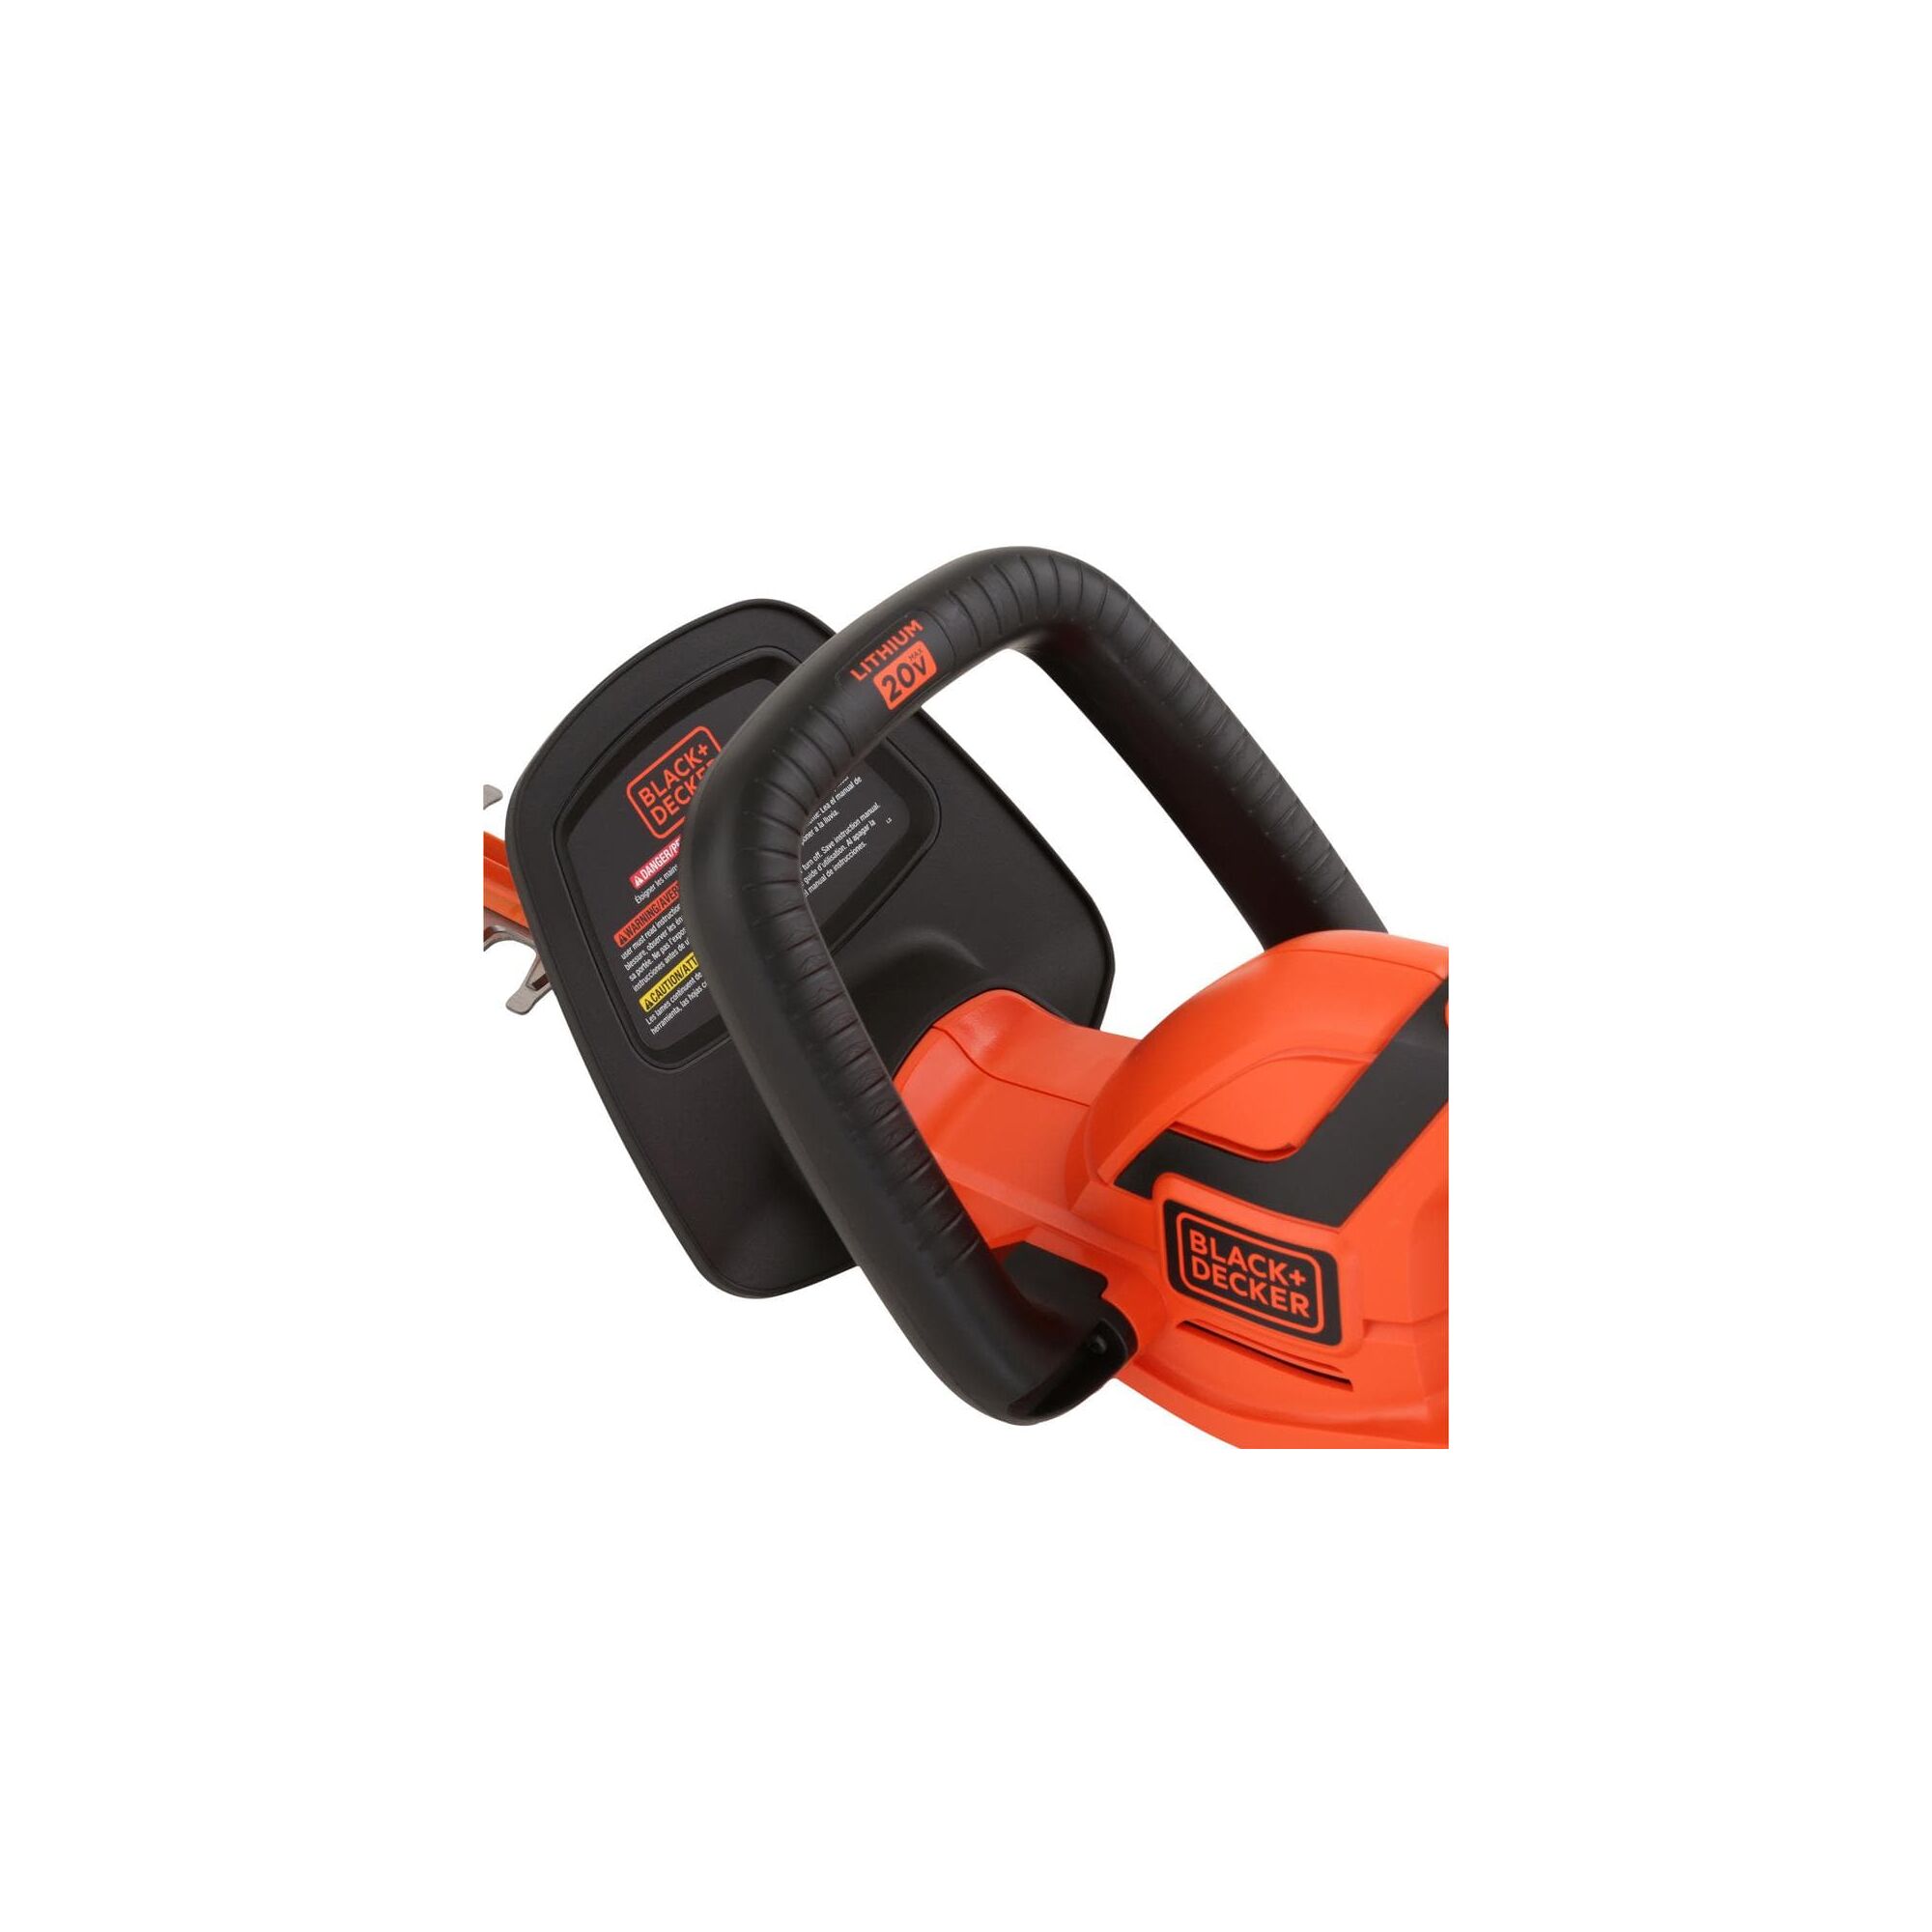 Close up of key feature on the BLACK+DECKER hedge trimmer